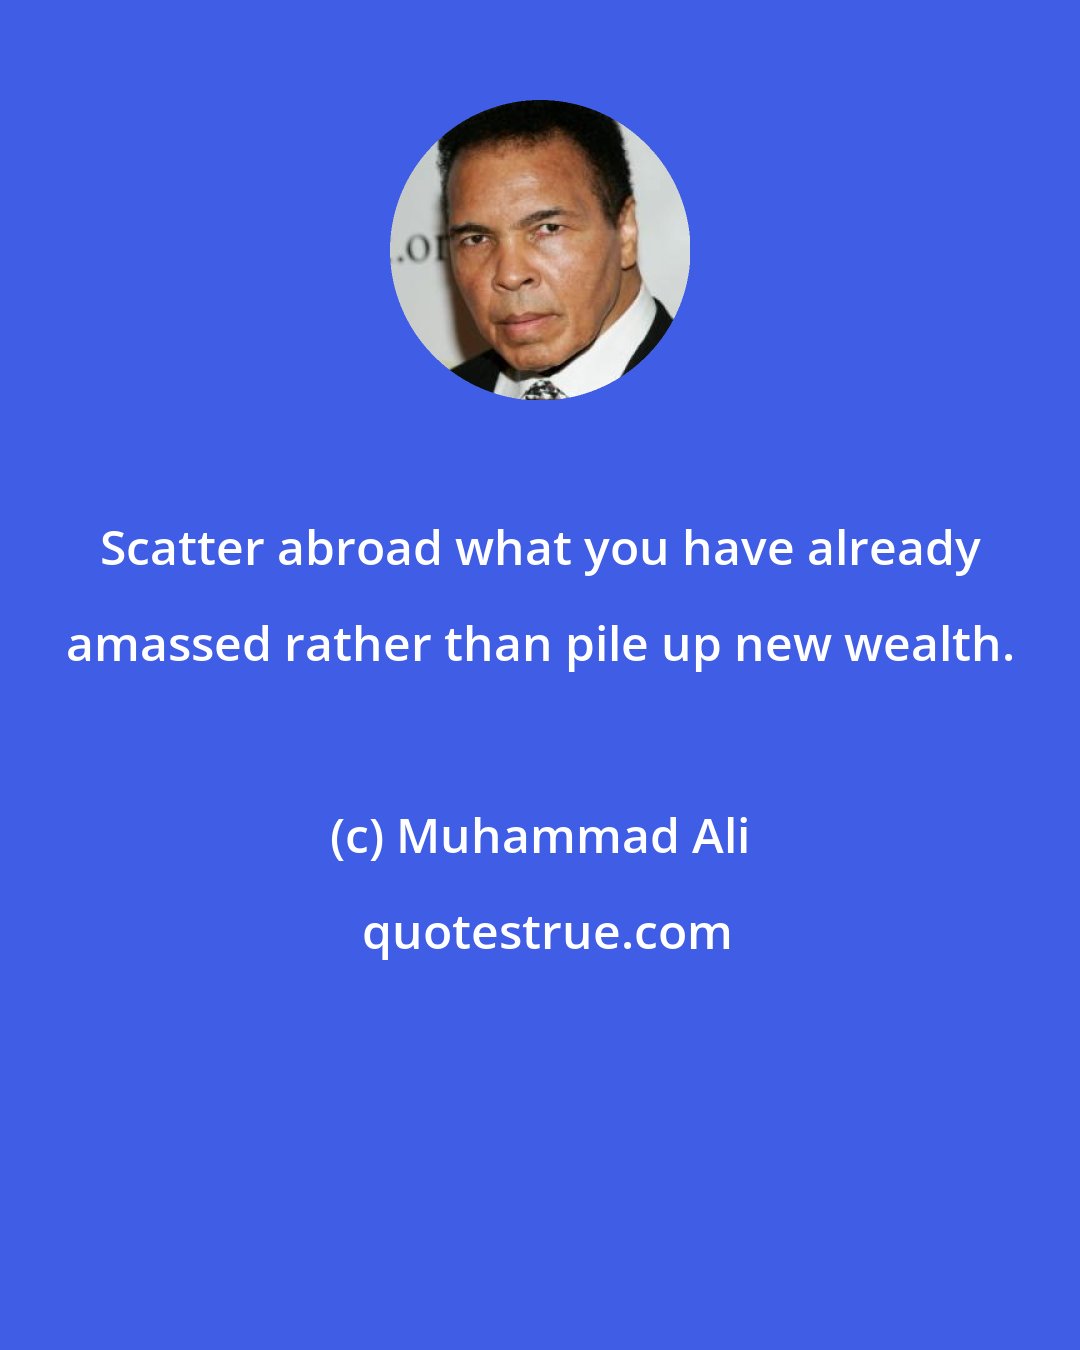 Muhammad Ali: Scatter abroad what you have already amassed rather than pile up new wealth.